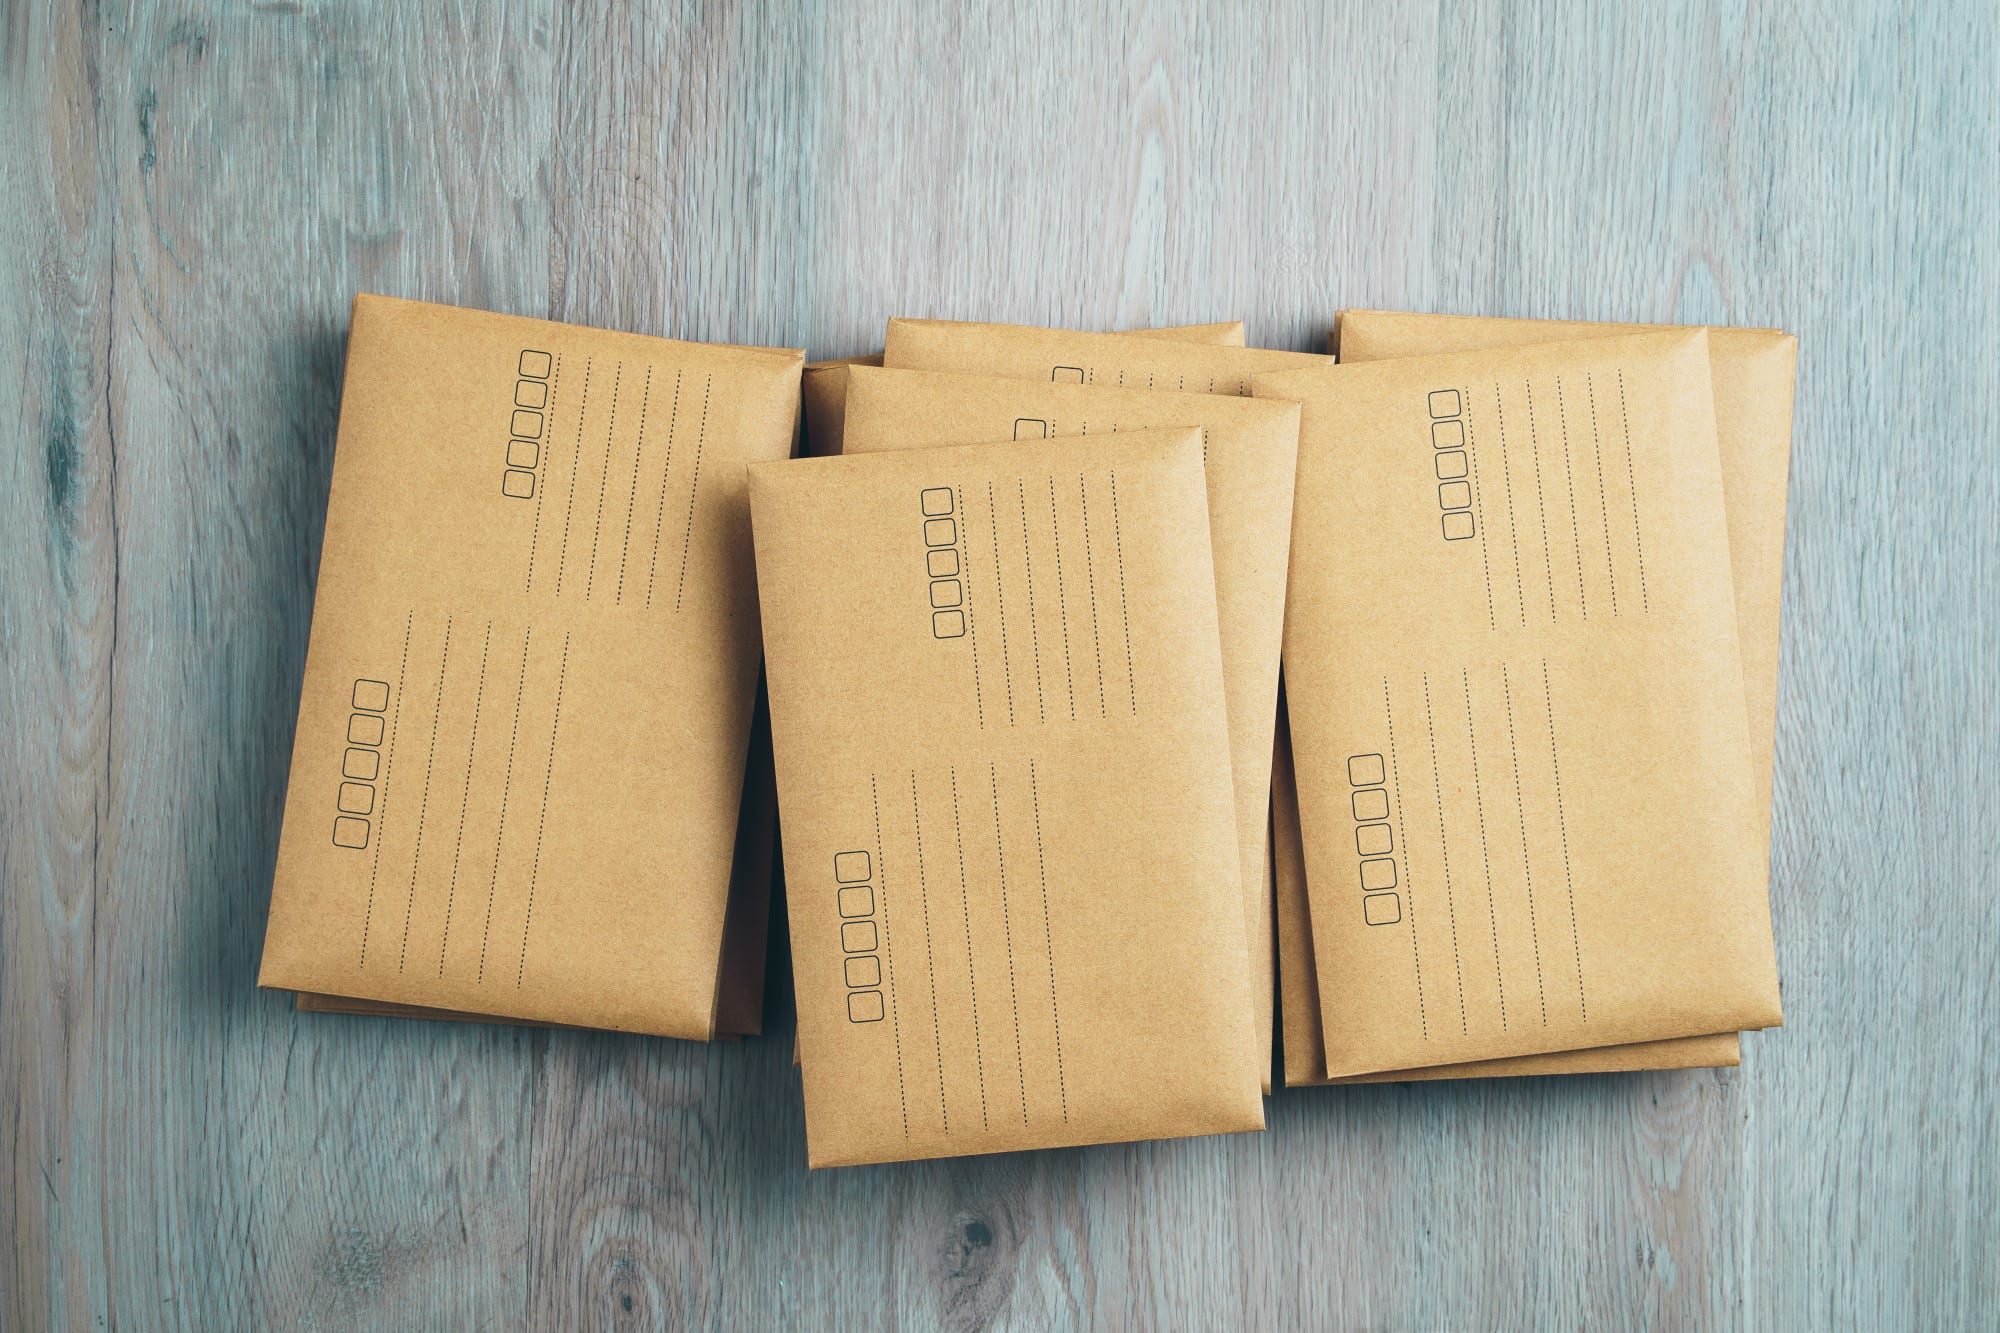 Stacked brown envelopes on wooden background.